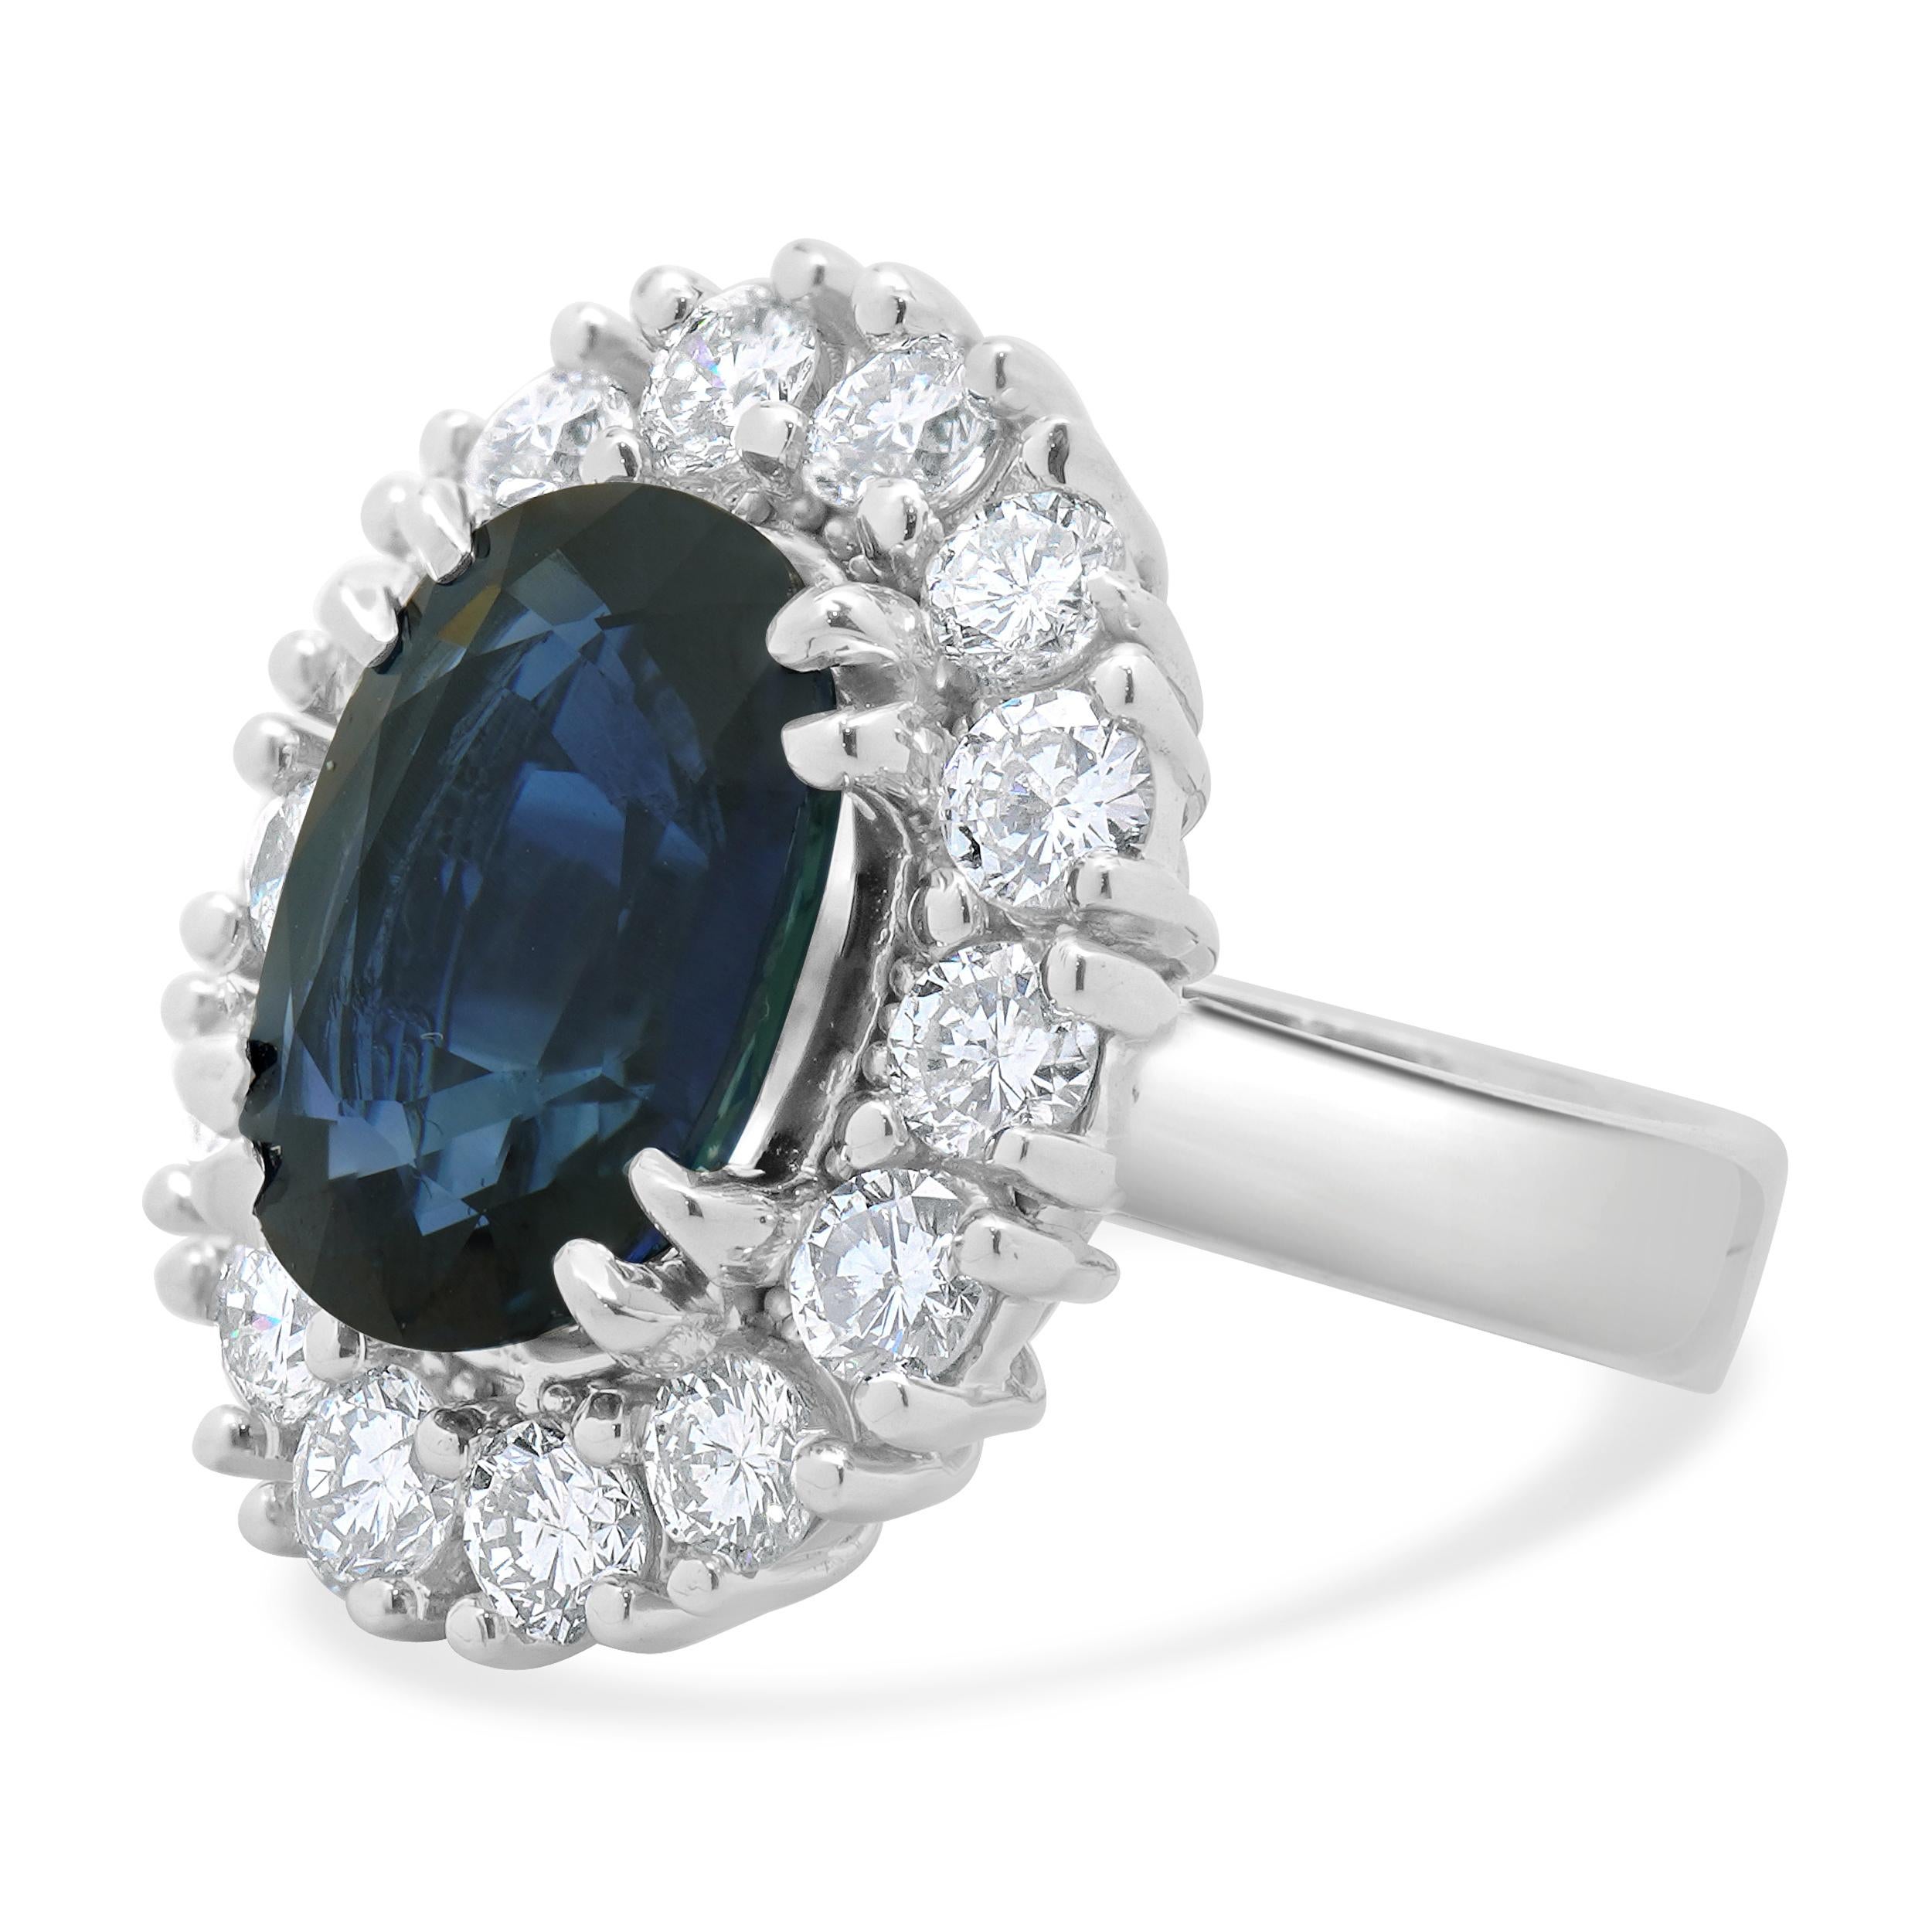 Designer: custom
Material: 14K white gold
Diamond:  round brilliant cut = 5.06cttw
Color: G
Clarity: SI1
Oval Sapphire:  9.65cttw
Ring Size: 7 (please allow two extra shipping days for sizing requests) 
Weight: 21.86 grams
